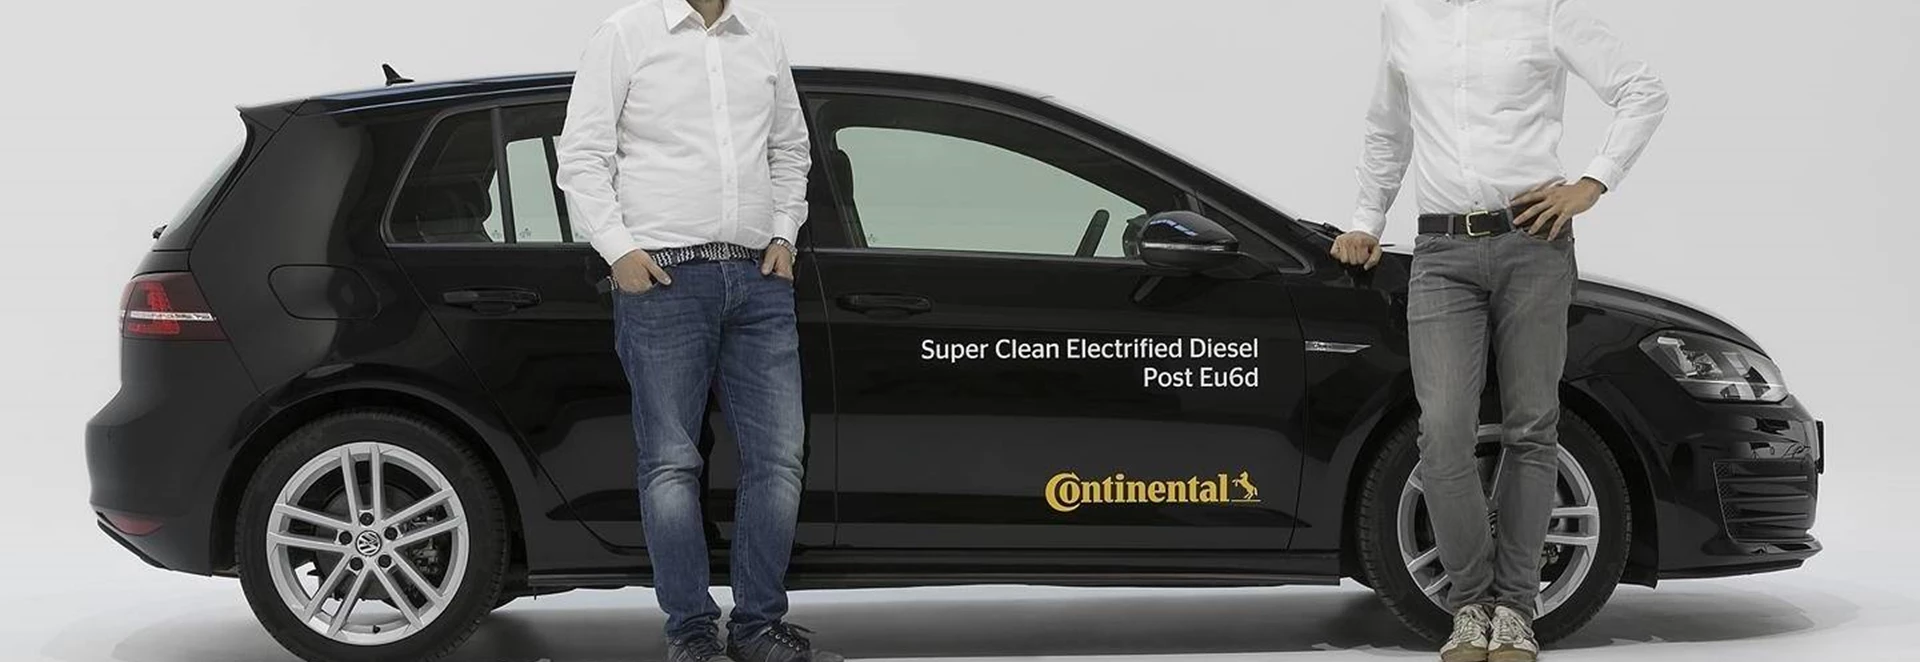 Continental invents system to cut real-world diesel emissions by up to 60% 